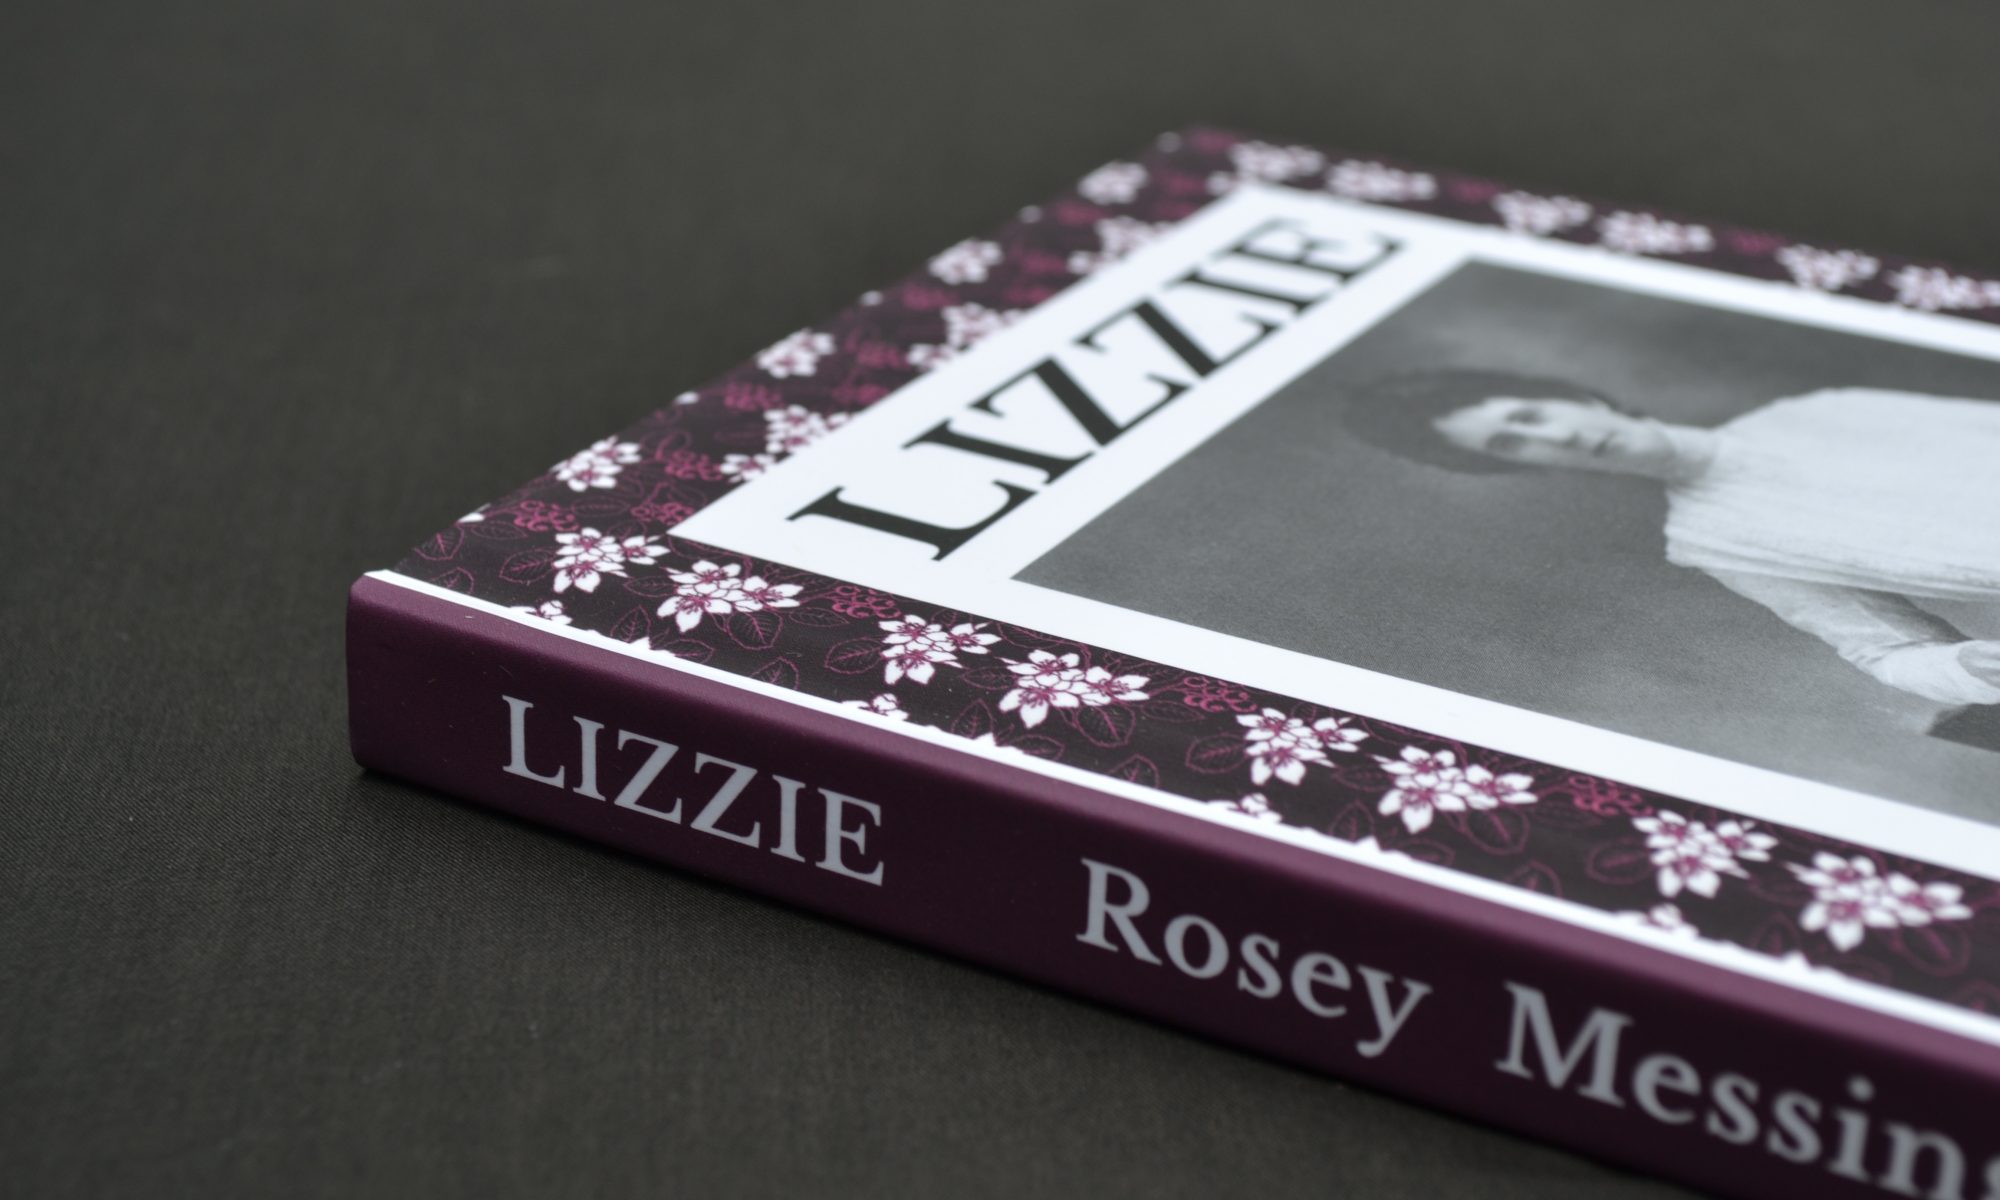 Lizze by Rosey Messing - Published by Beachy Books - Featured Image - 72dpi Web